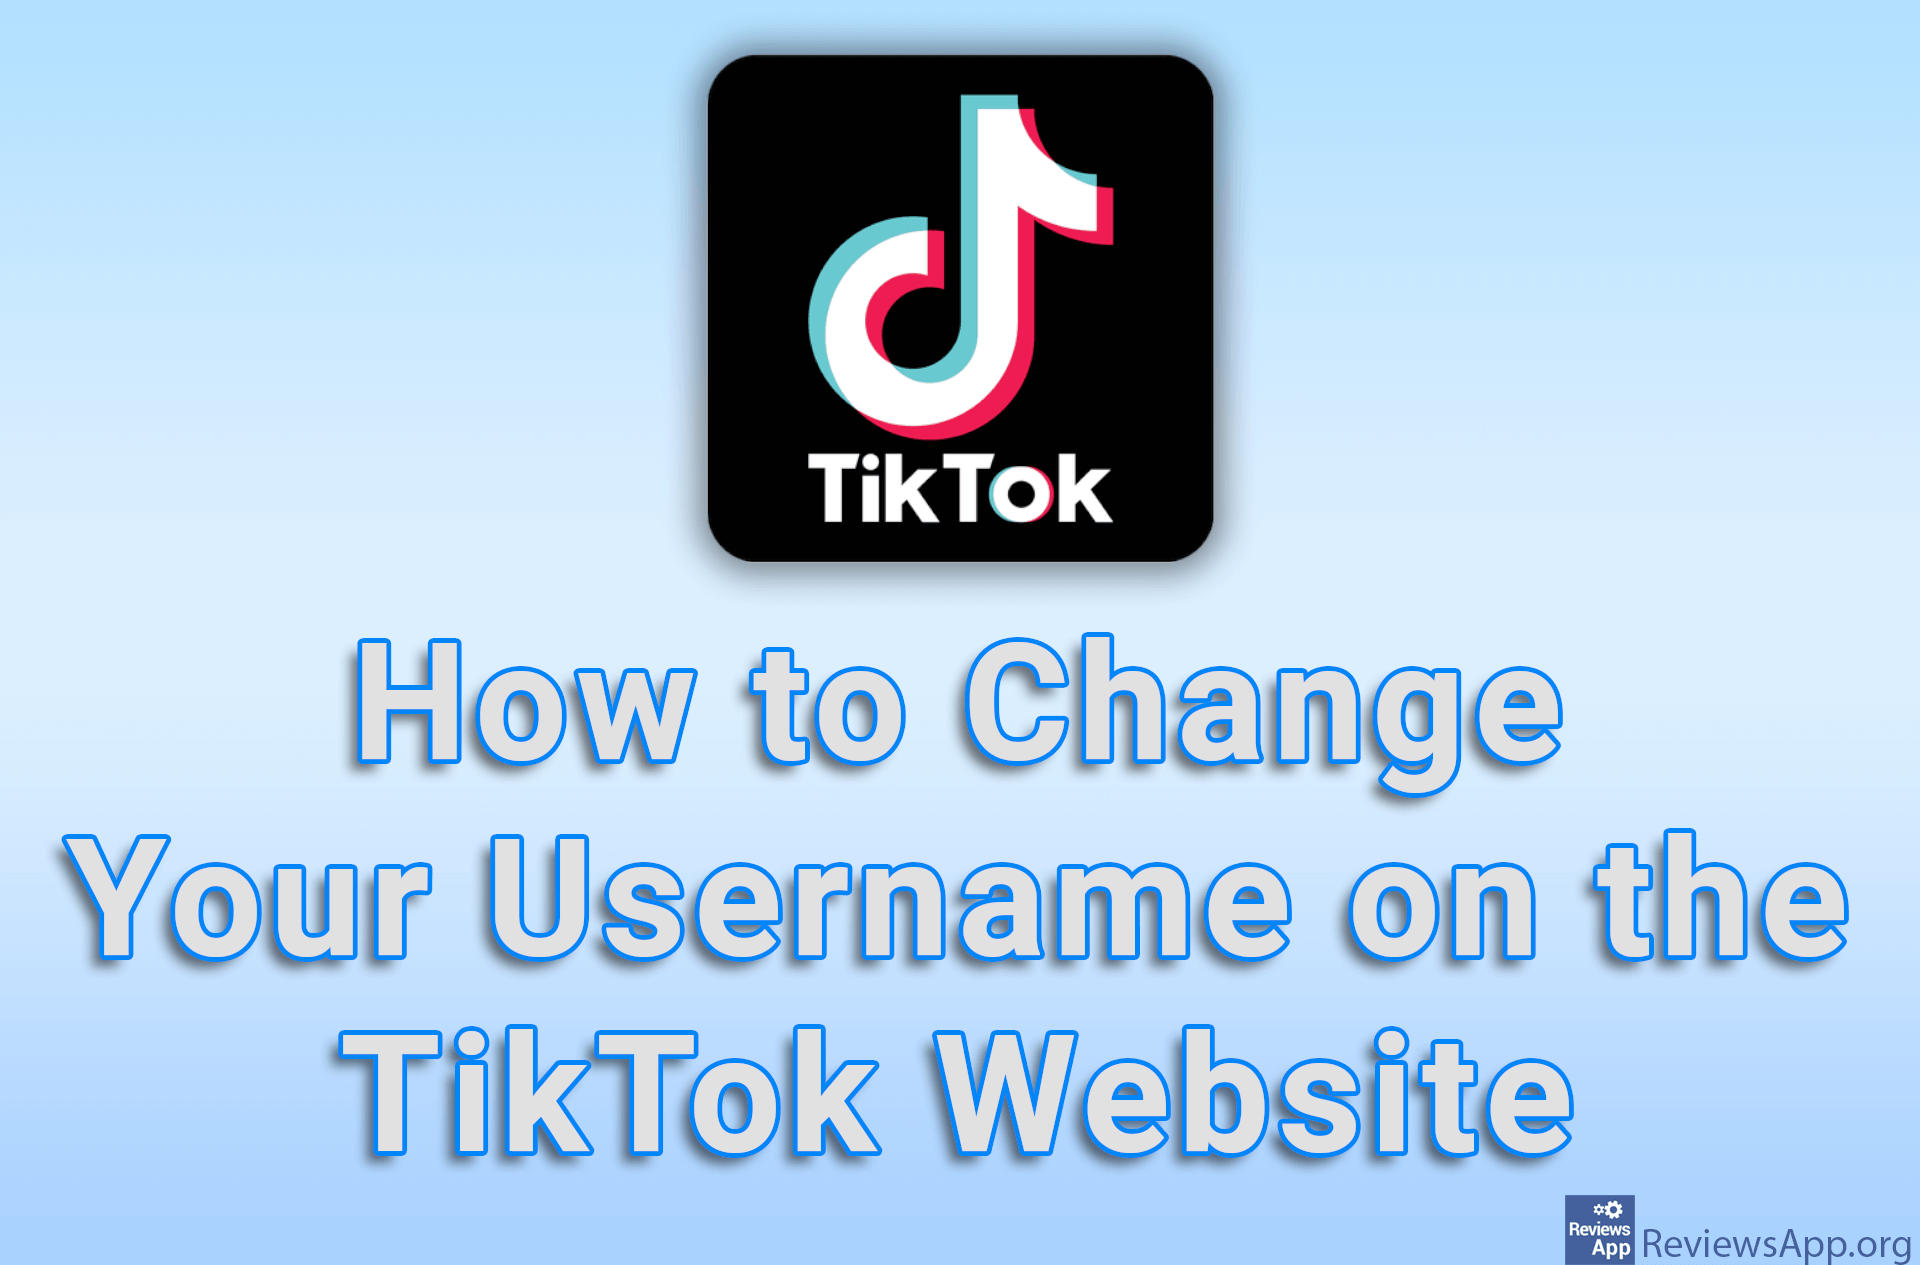 How to Change Your Username on the TikTok Website